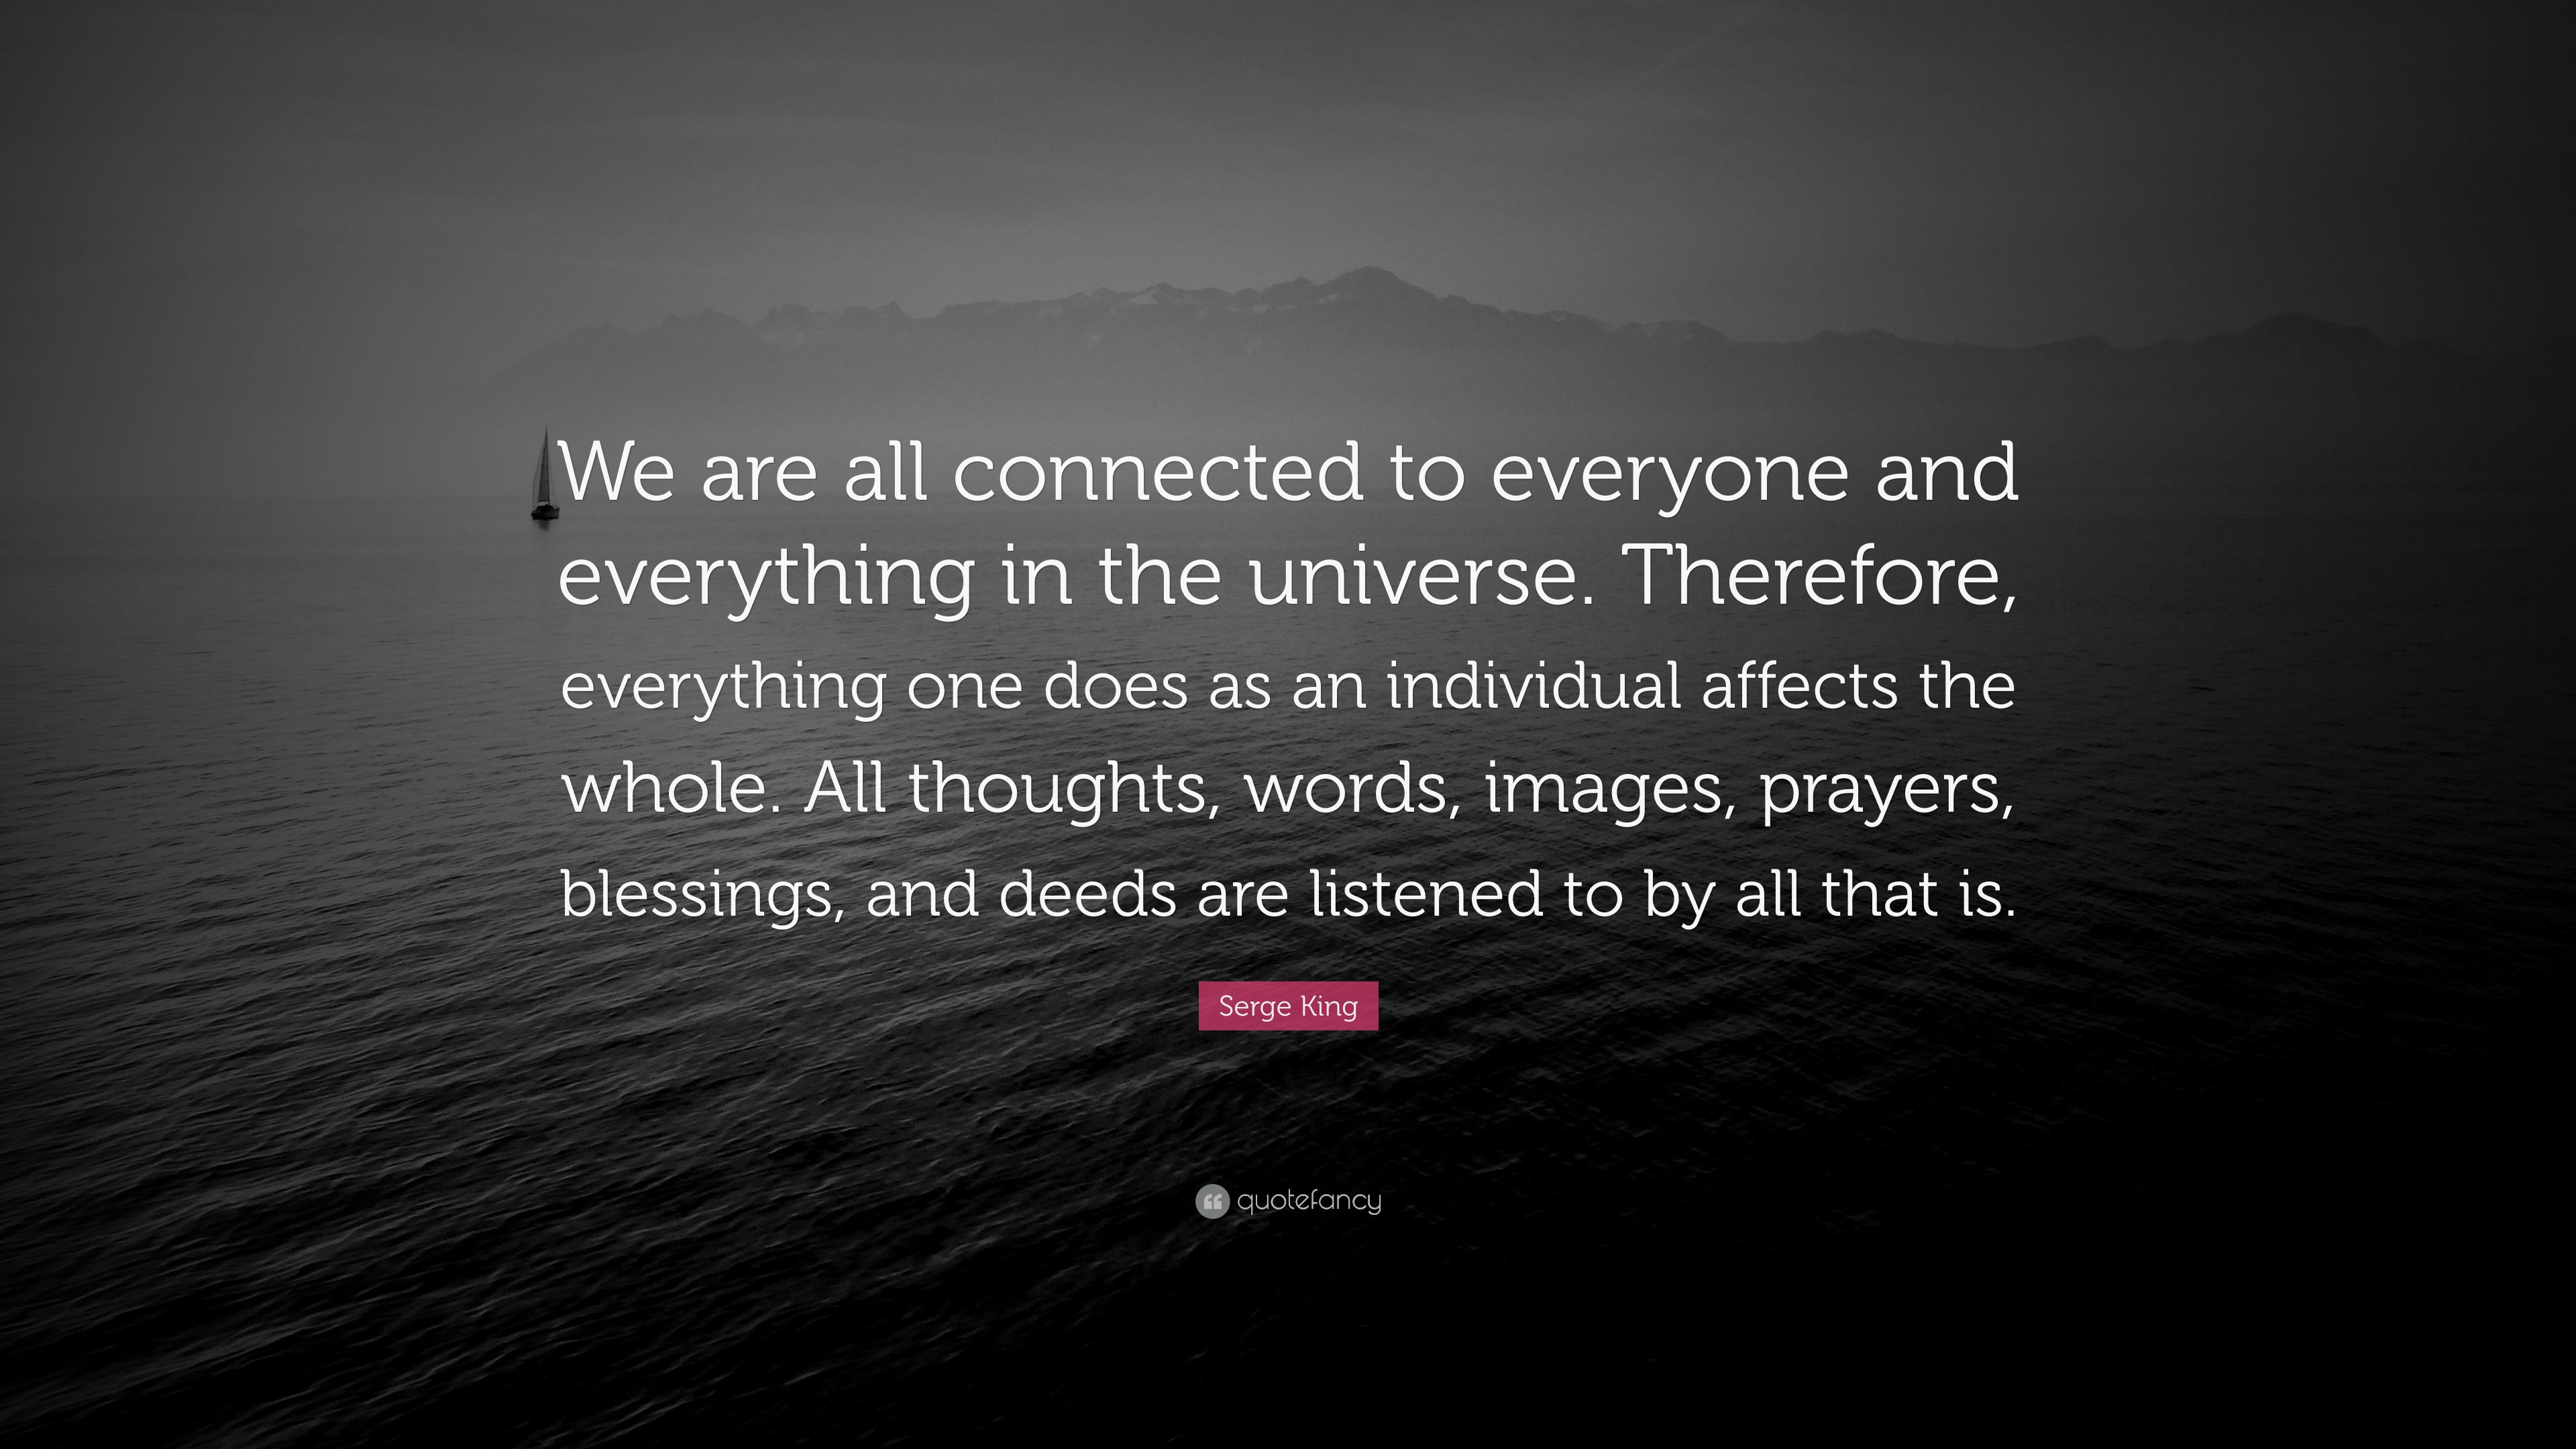 Serge King Quote: “We are all connected to everyone and everything in the universe. Therefore, everything one does as an individual affects.” (7 wallpaper)